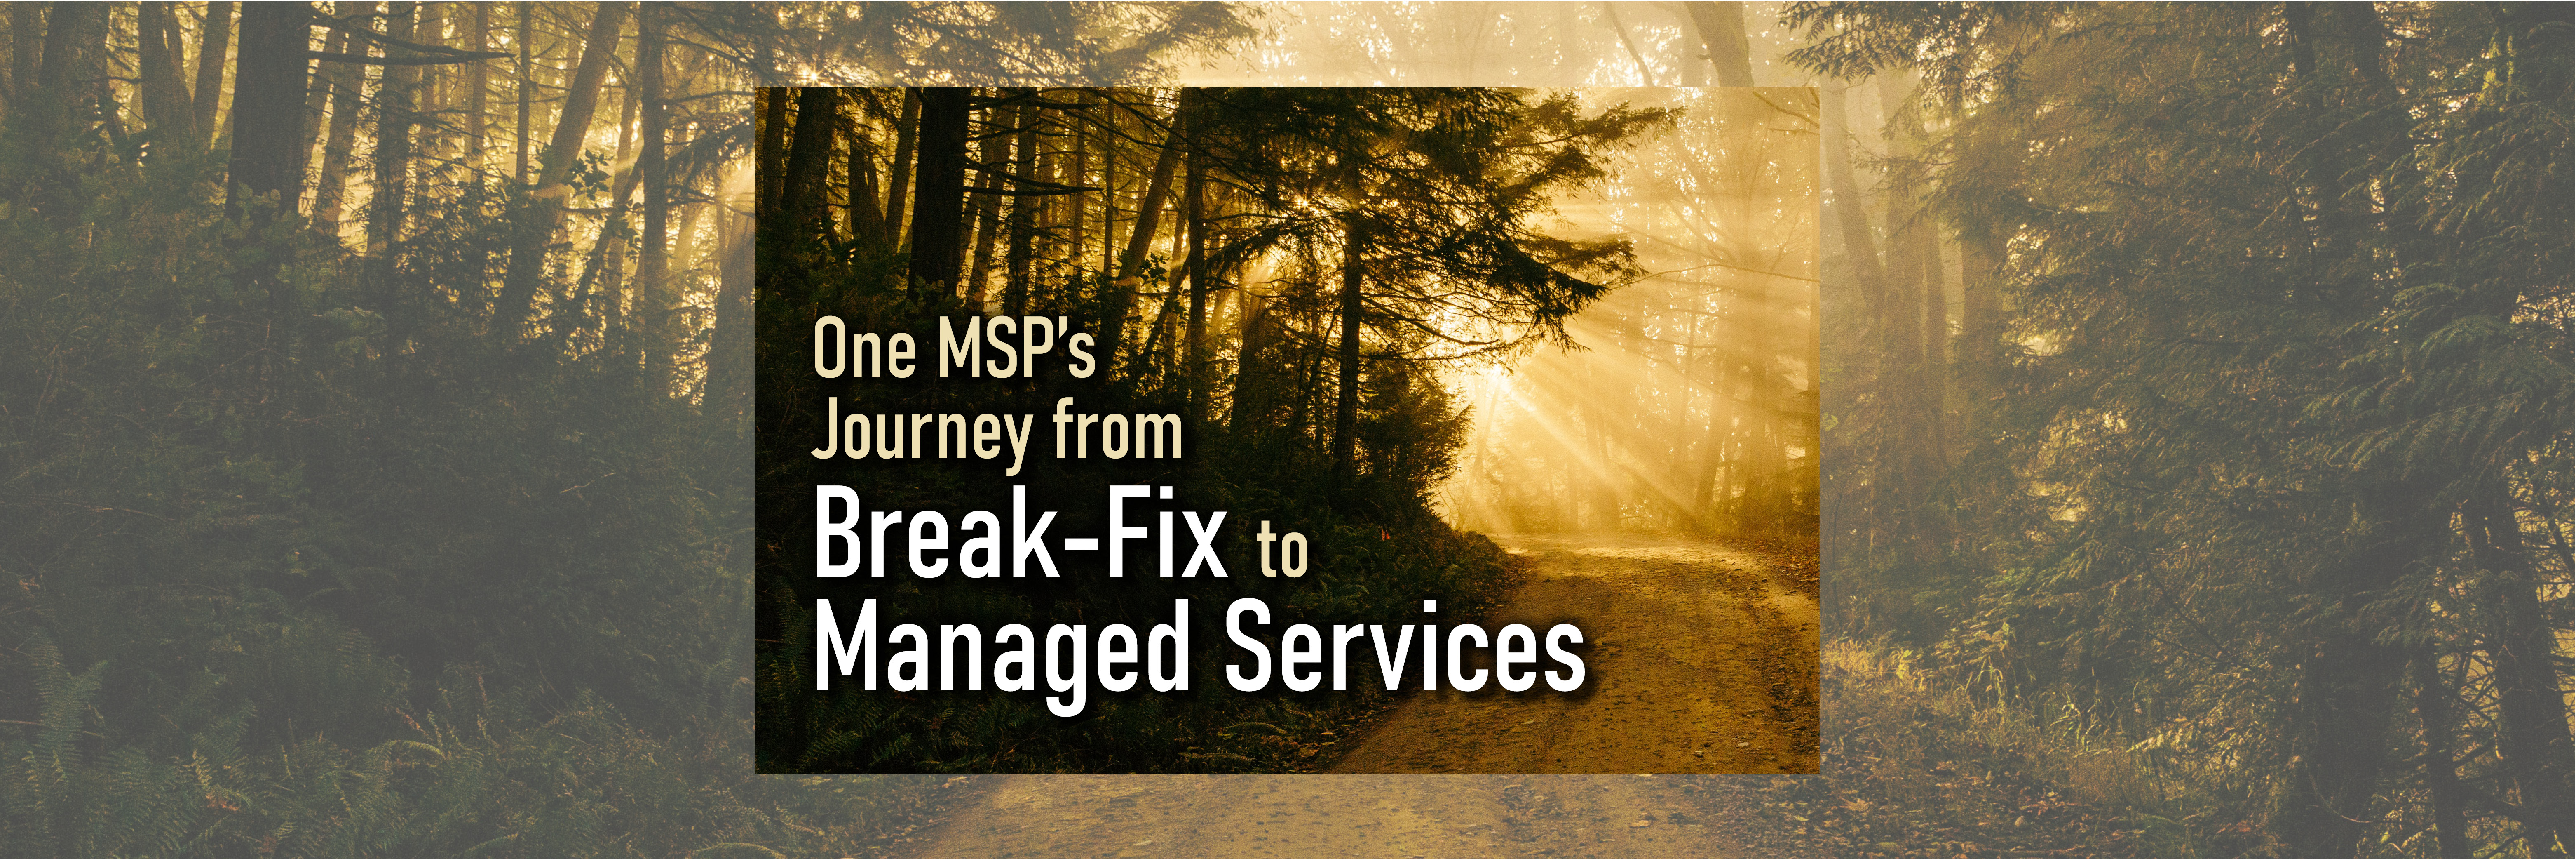 VLOG: One MSP's Journey from Break-Fix to Managed Services